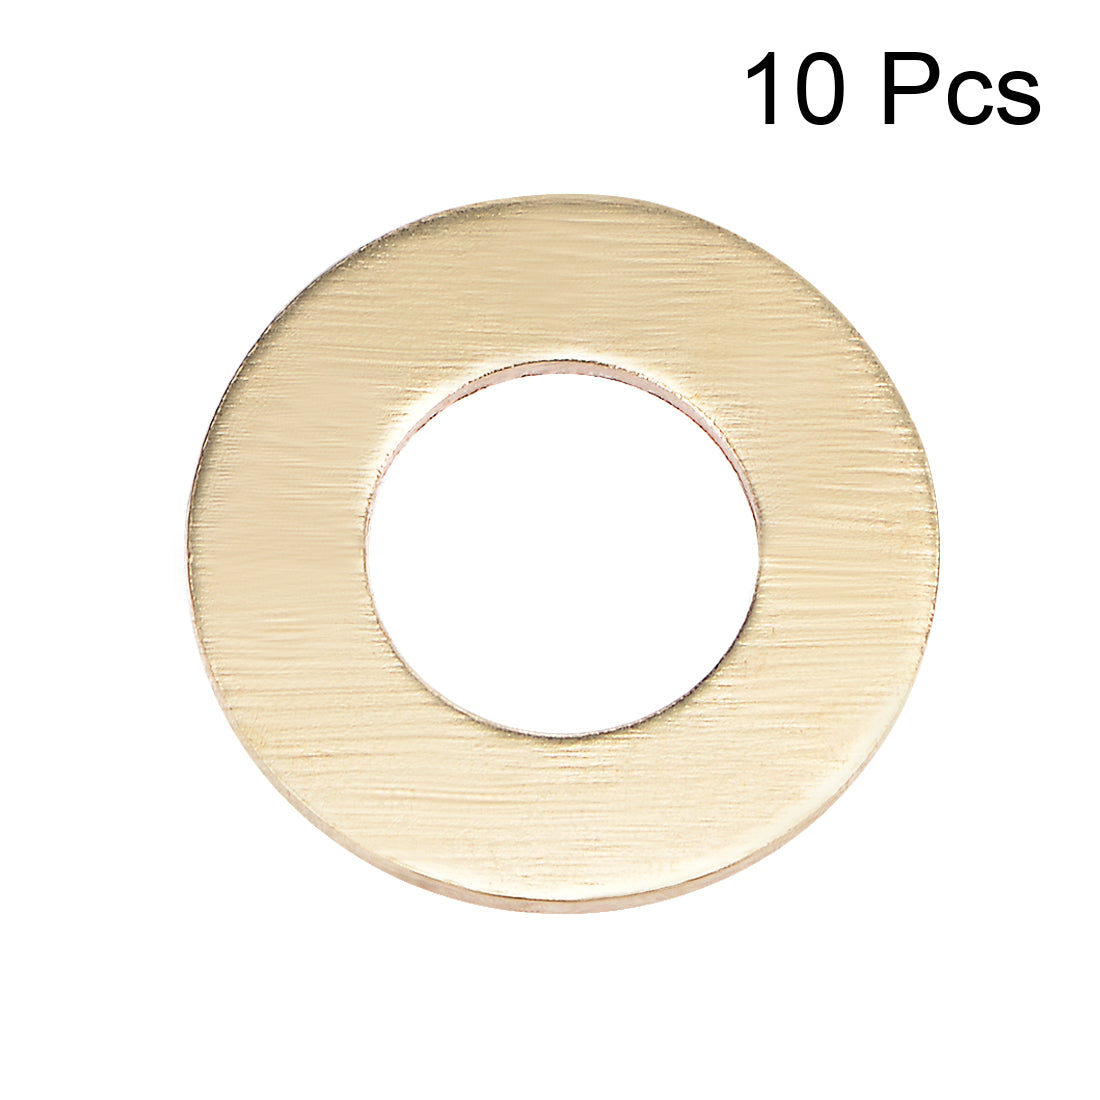 uxcell Uxcell 10Pcs 10.5mm x 20mm x 1.5mm Copper Flat Washer for Screw Bolt